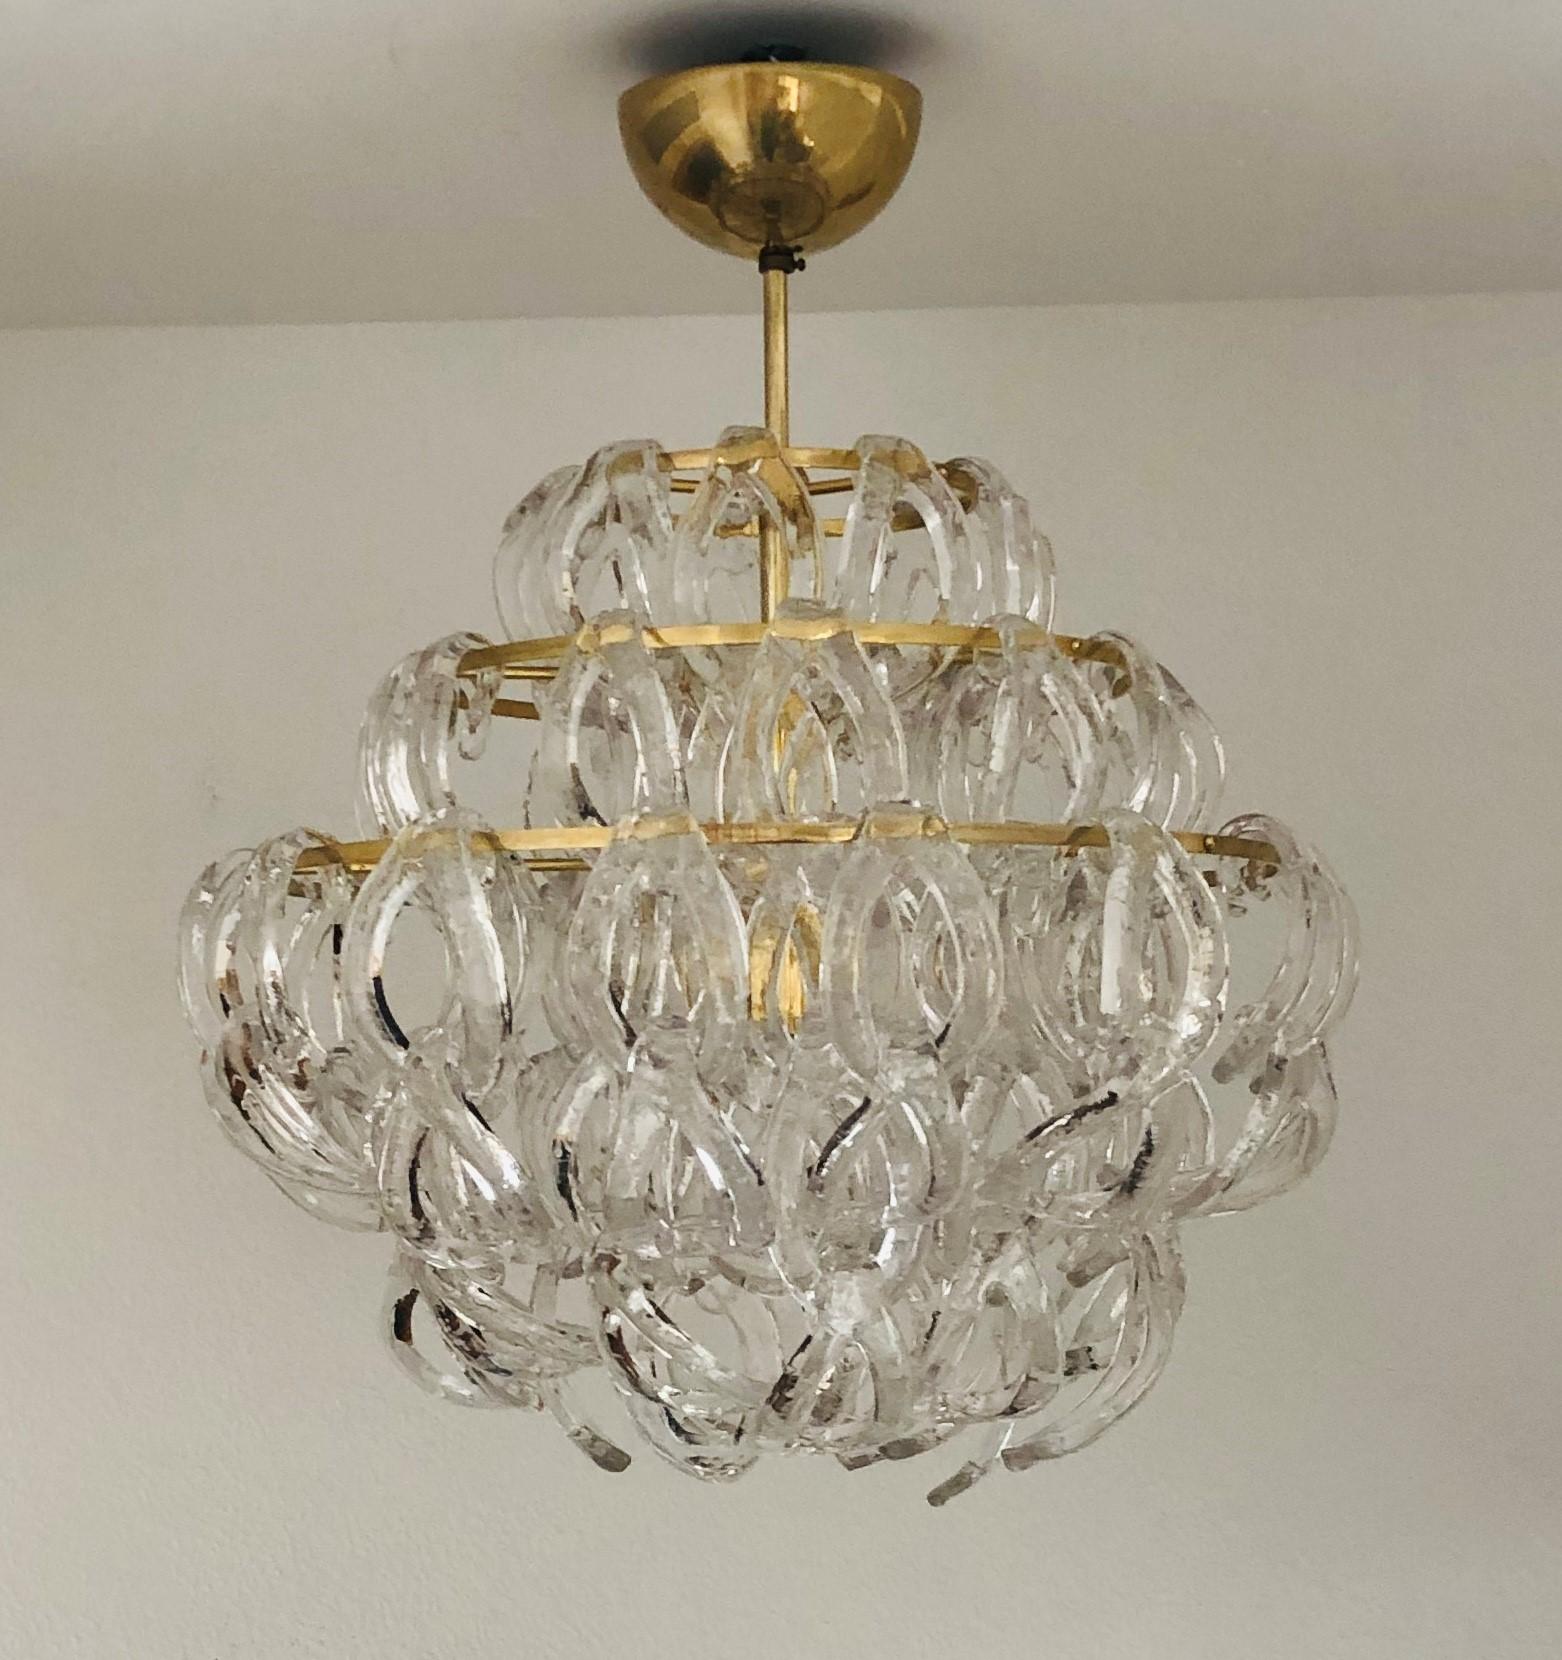 Stunning Italian Murano glass midcentury chandelier. This Chandelier was made during the 1970s in Italy by Angelo Mangiarotti.
This chandelier is composed by 100 units of link Murano glasses (called 